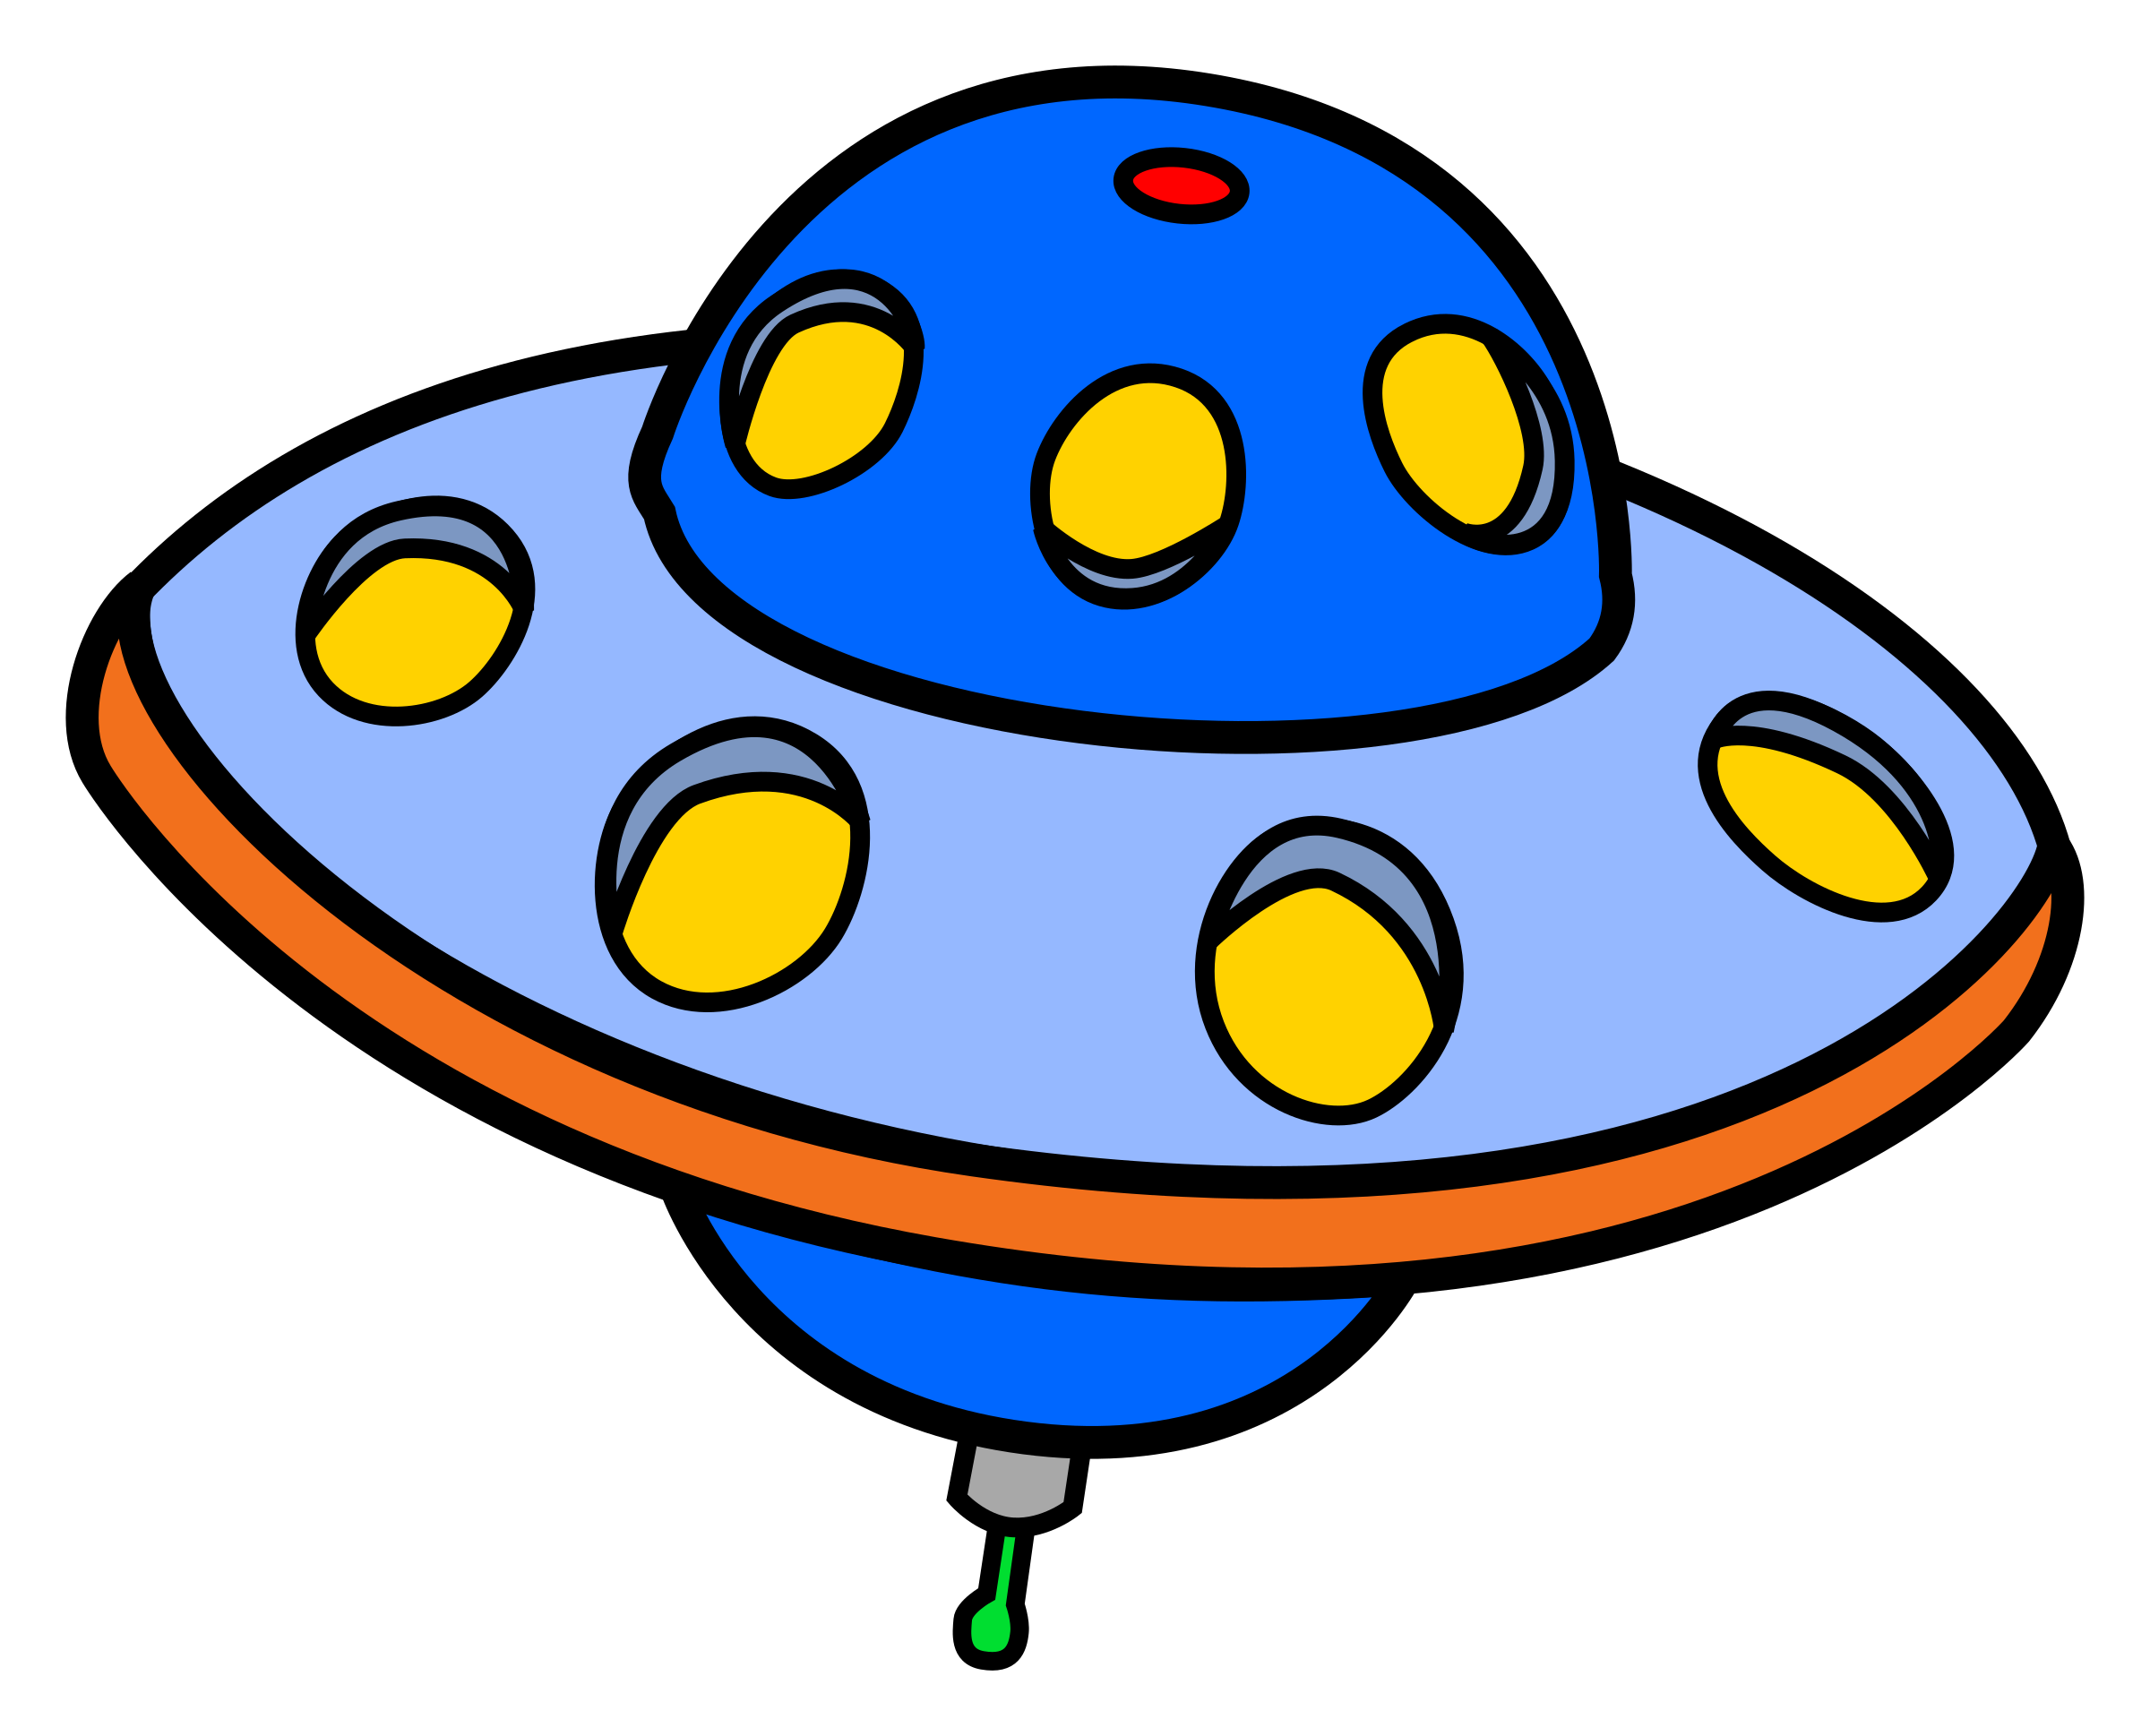 Flying Saucer UFO vector clipart image - Free stock photo - Public